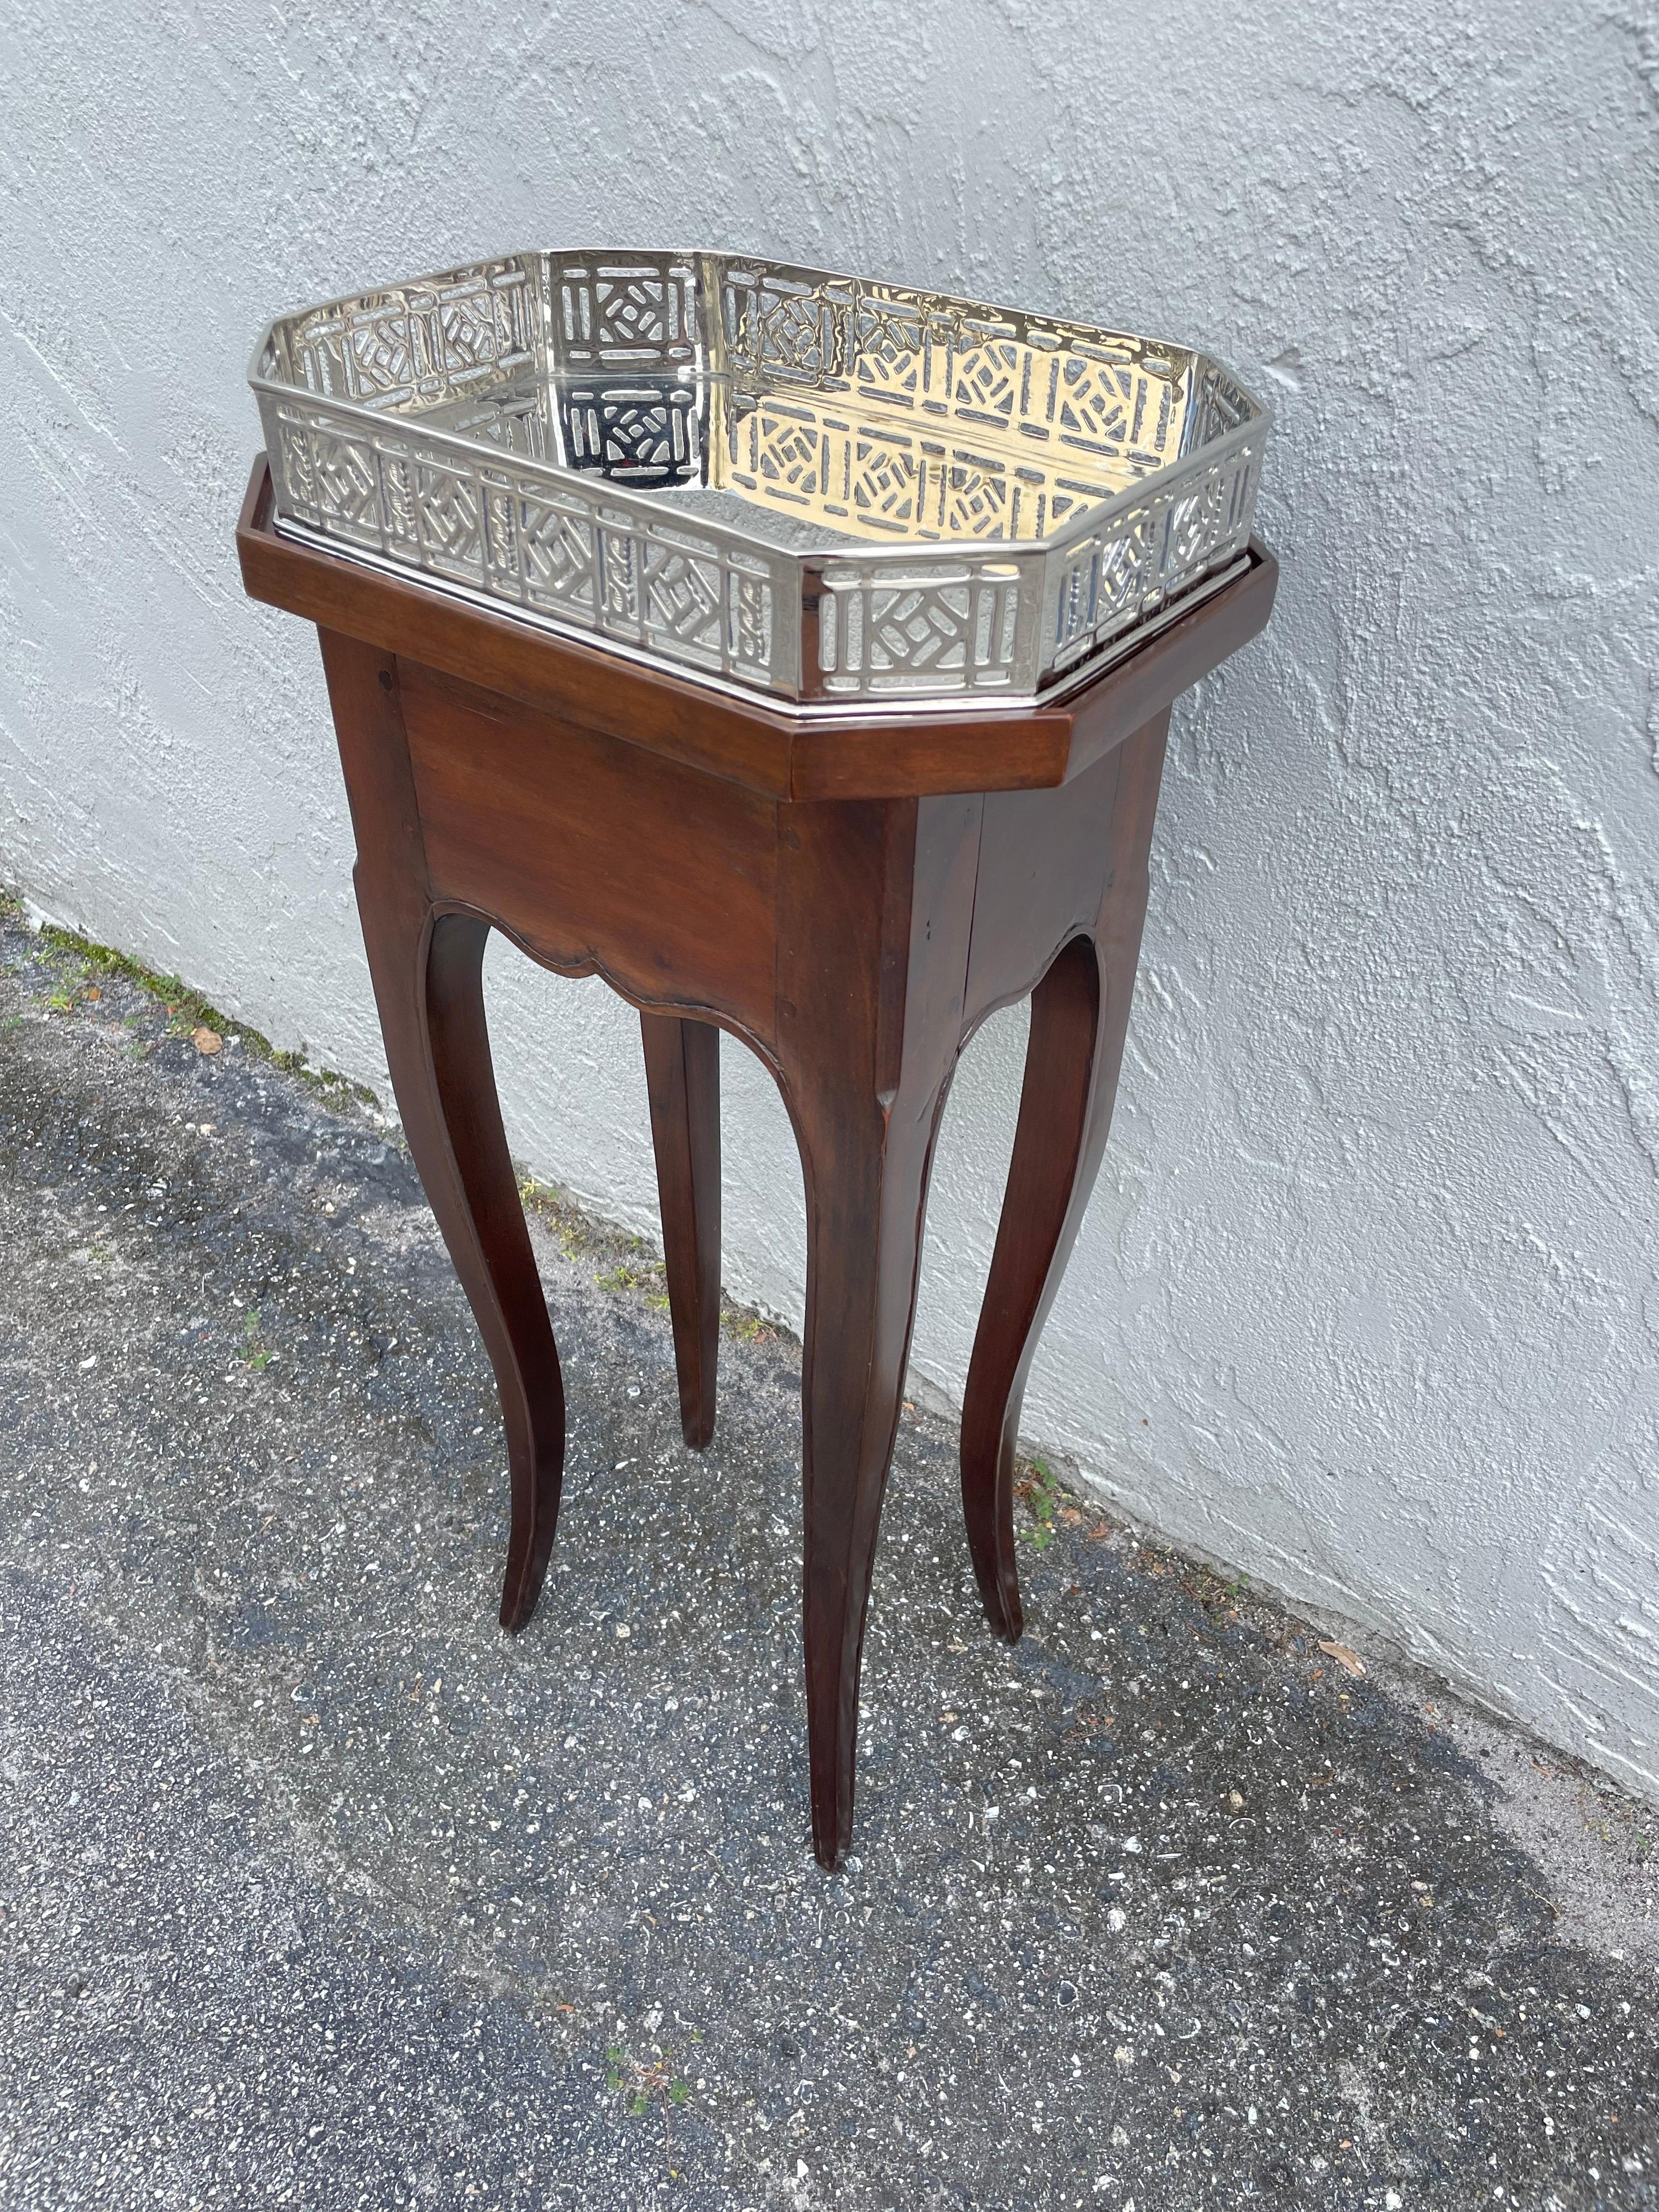 Country French style side table with silver plated galleried removable tray.